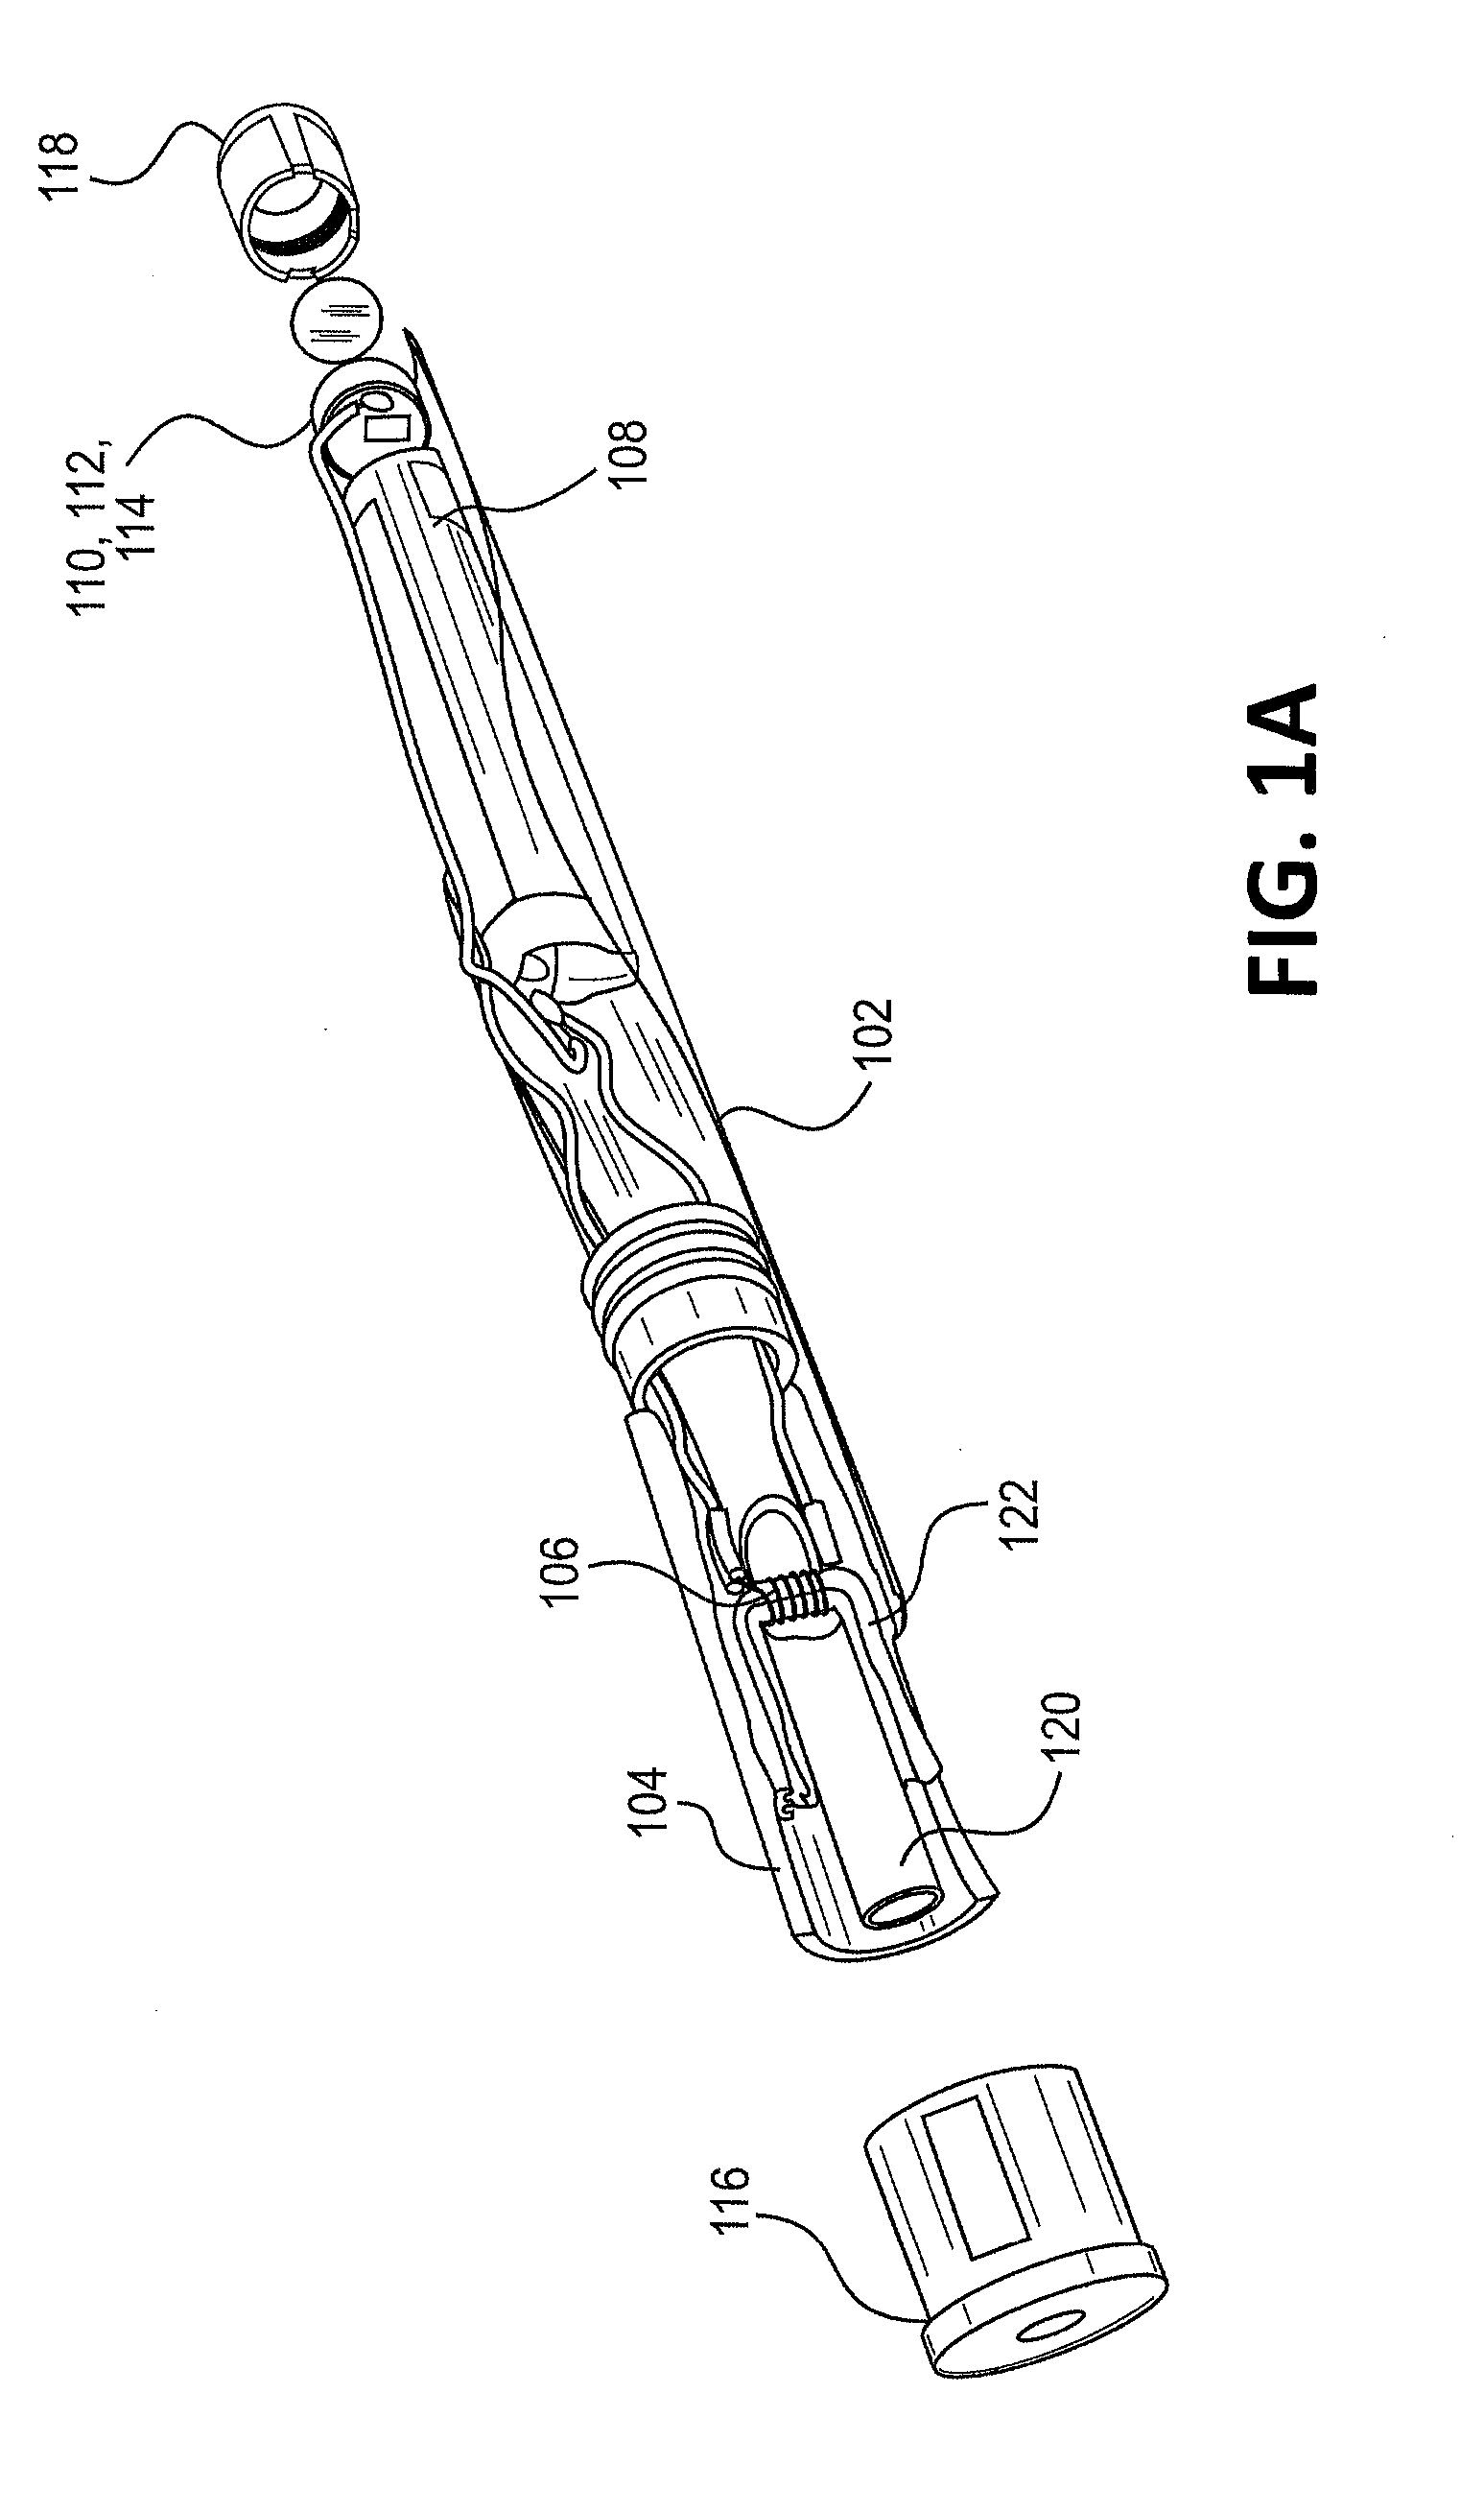 Compositions, devices, and methods for nicotine aerosol delivery